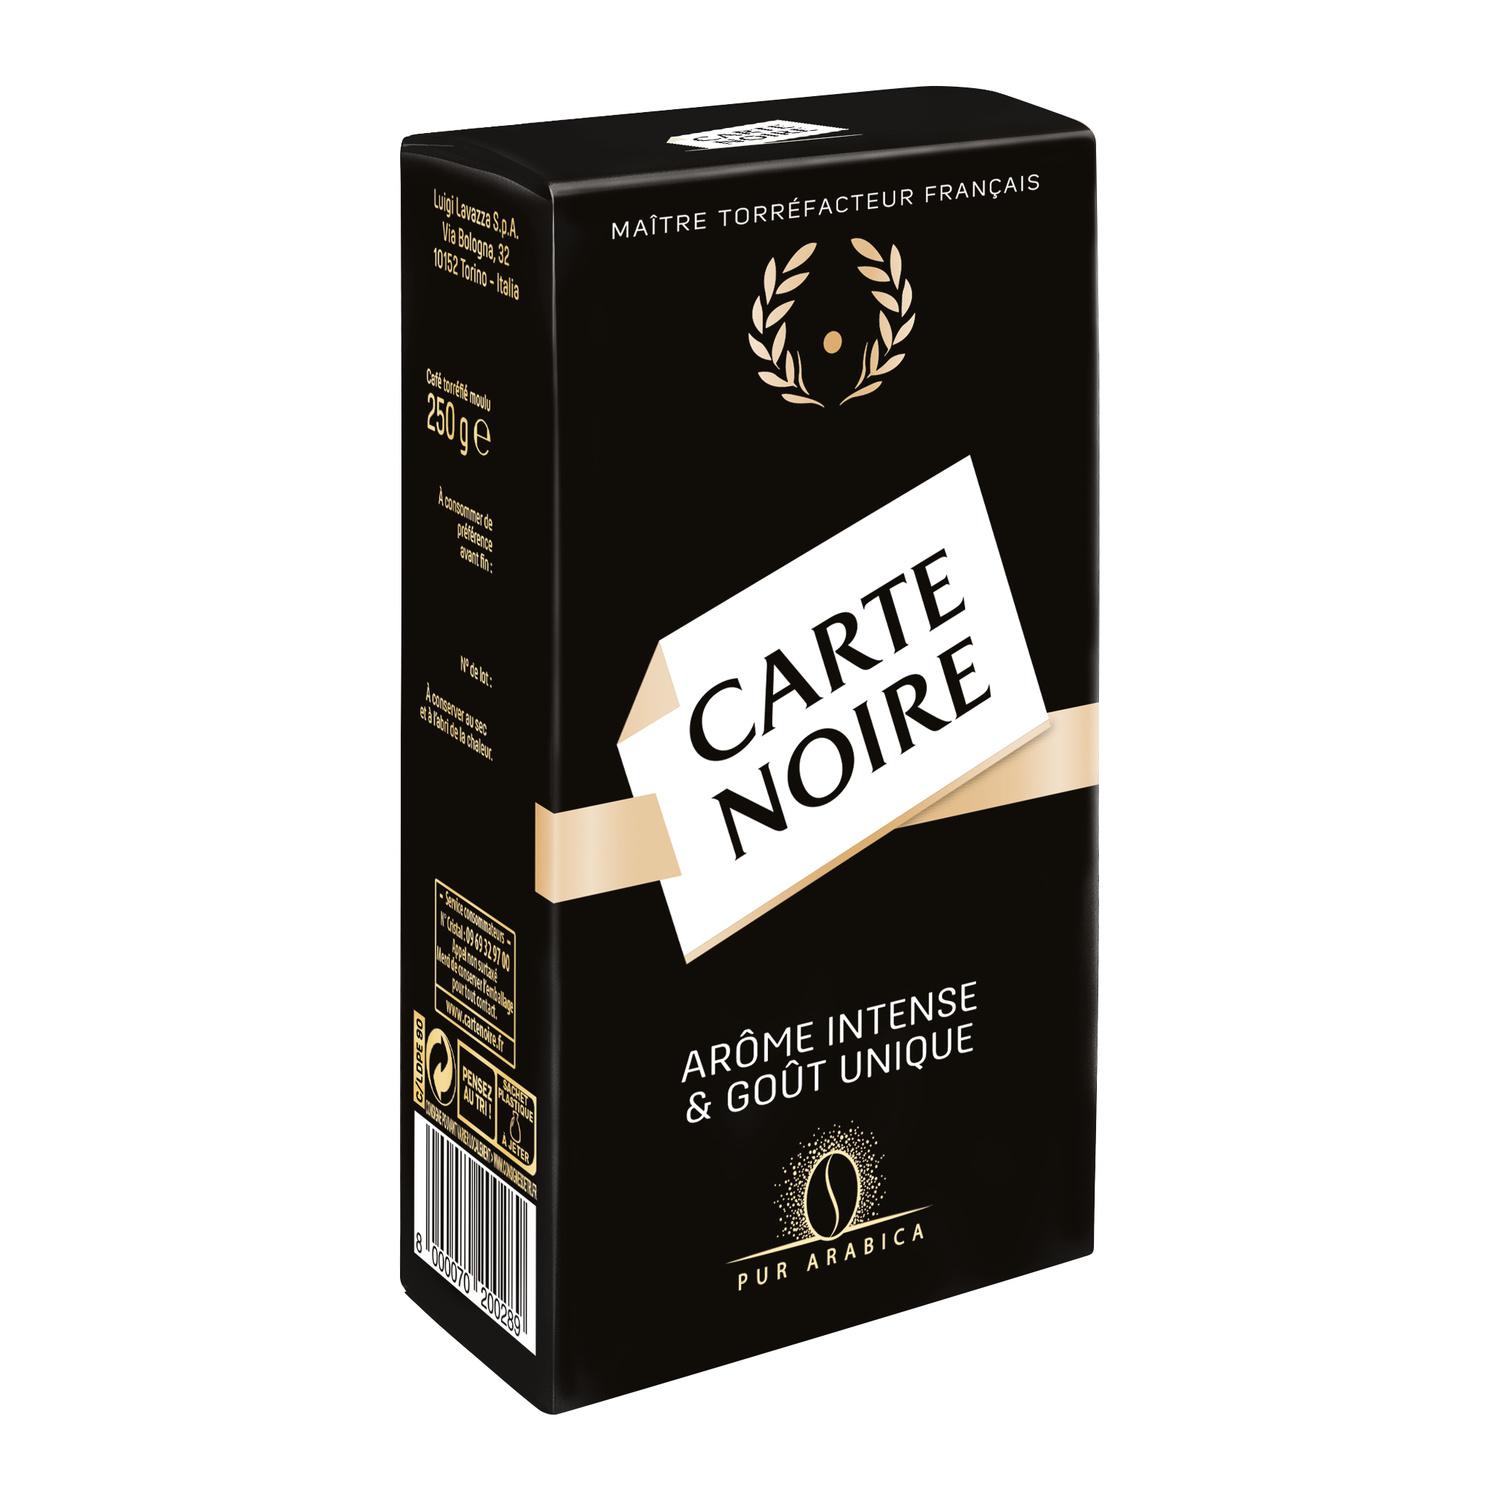  Carte  Noire  Ground Coffee  My French Grocery